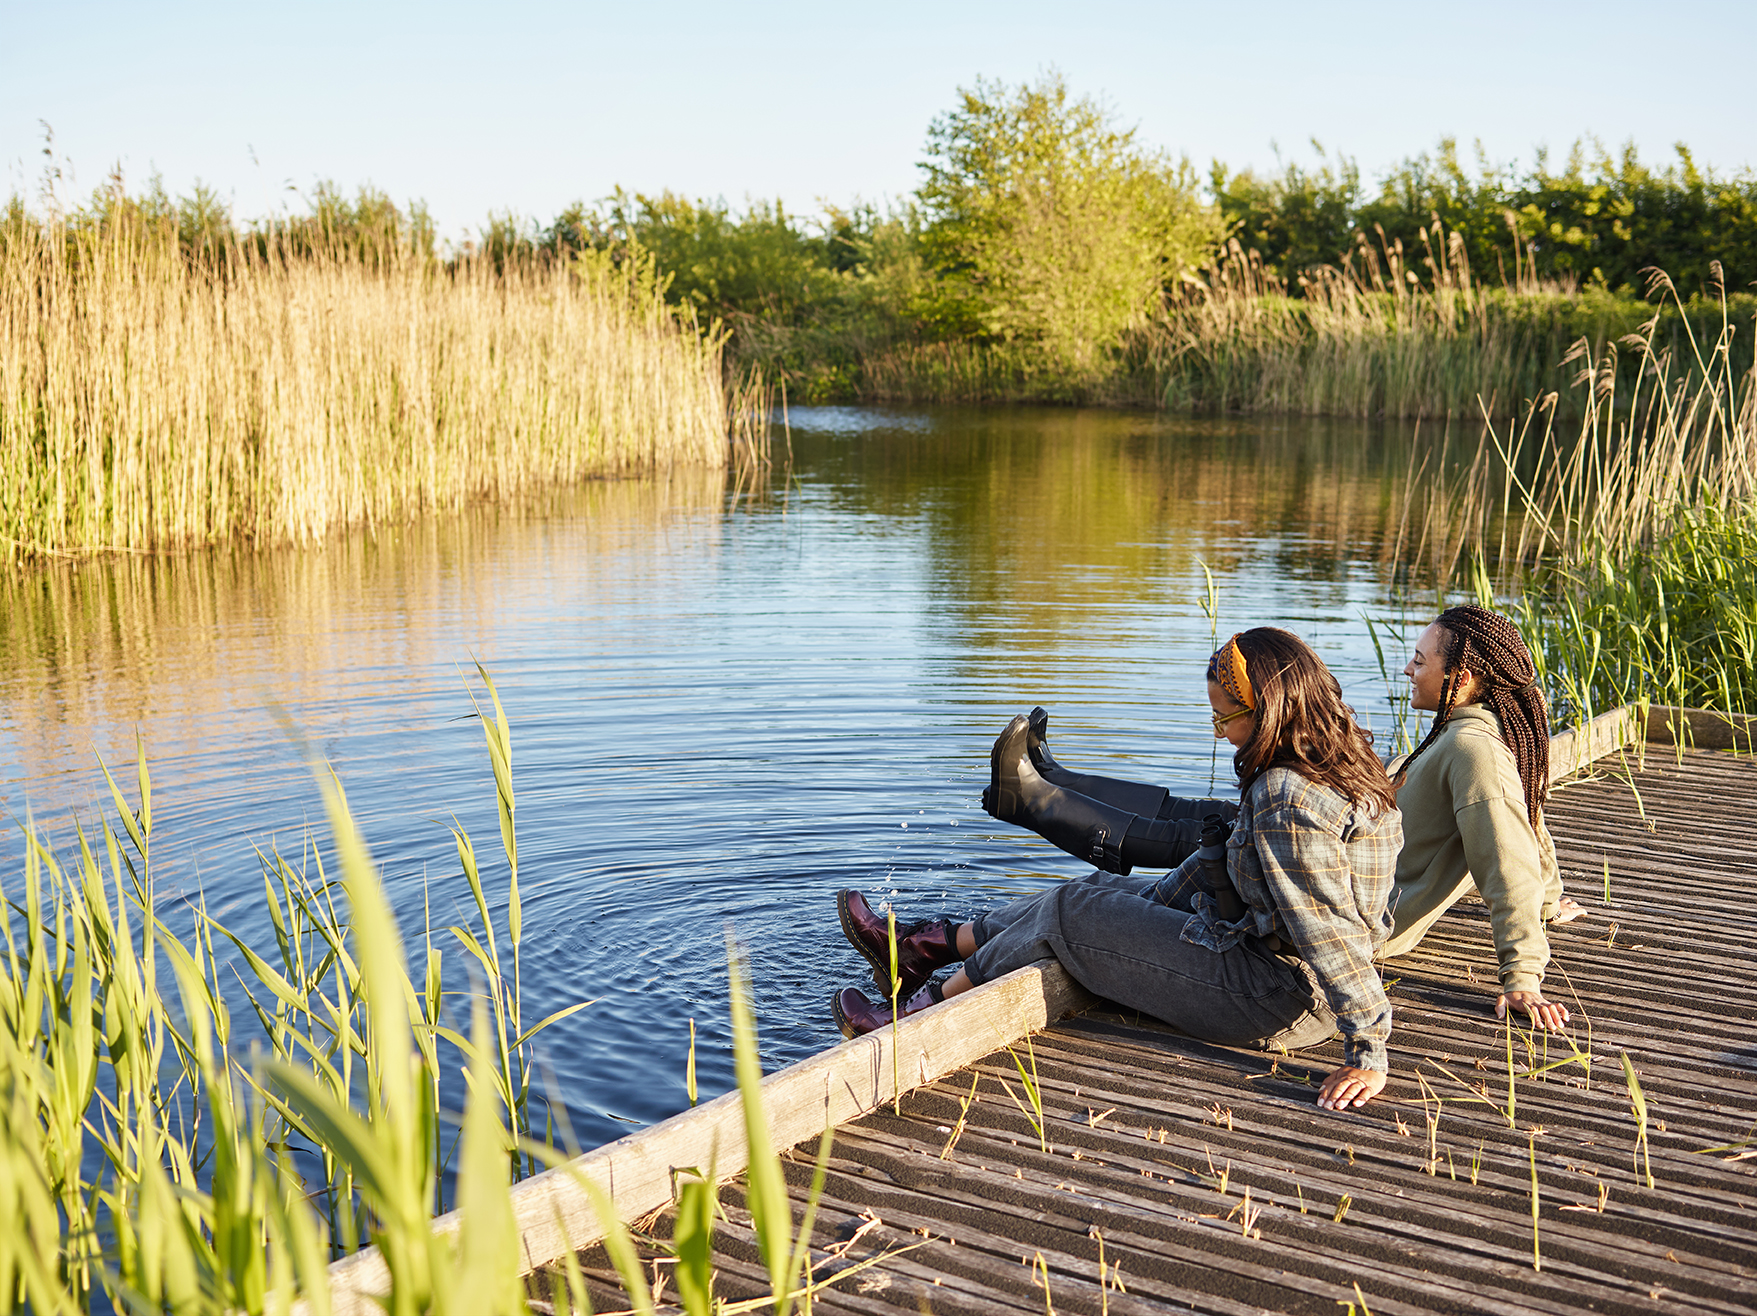 Two women sat on a jetty surrounded by water and grass reeds